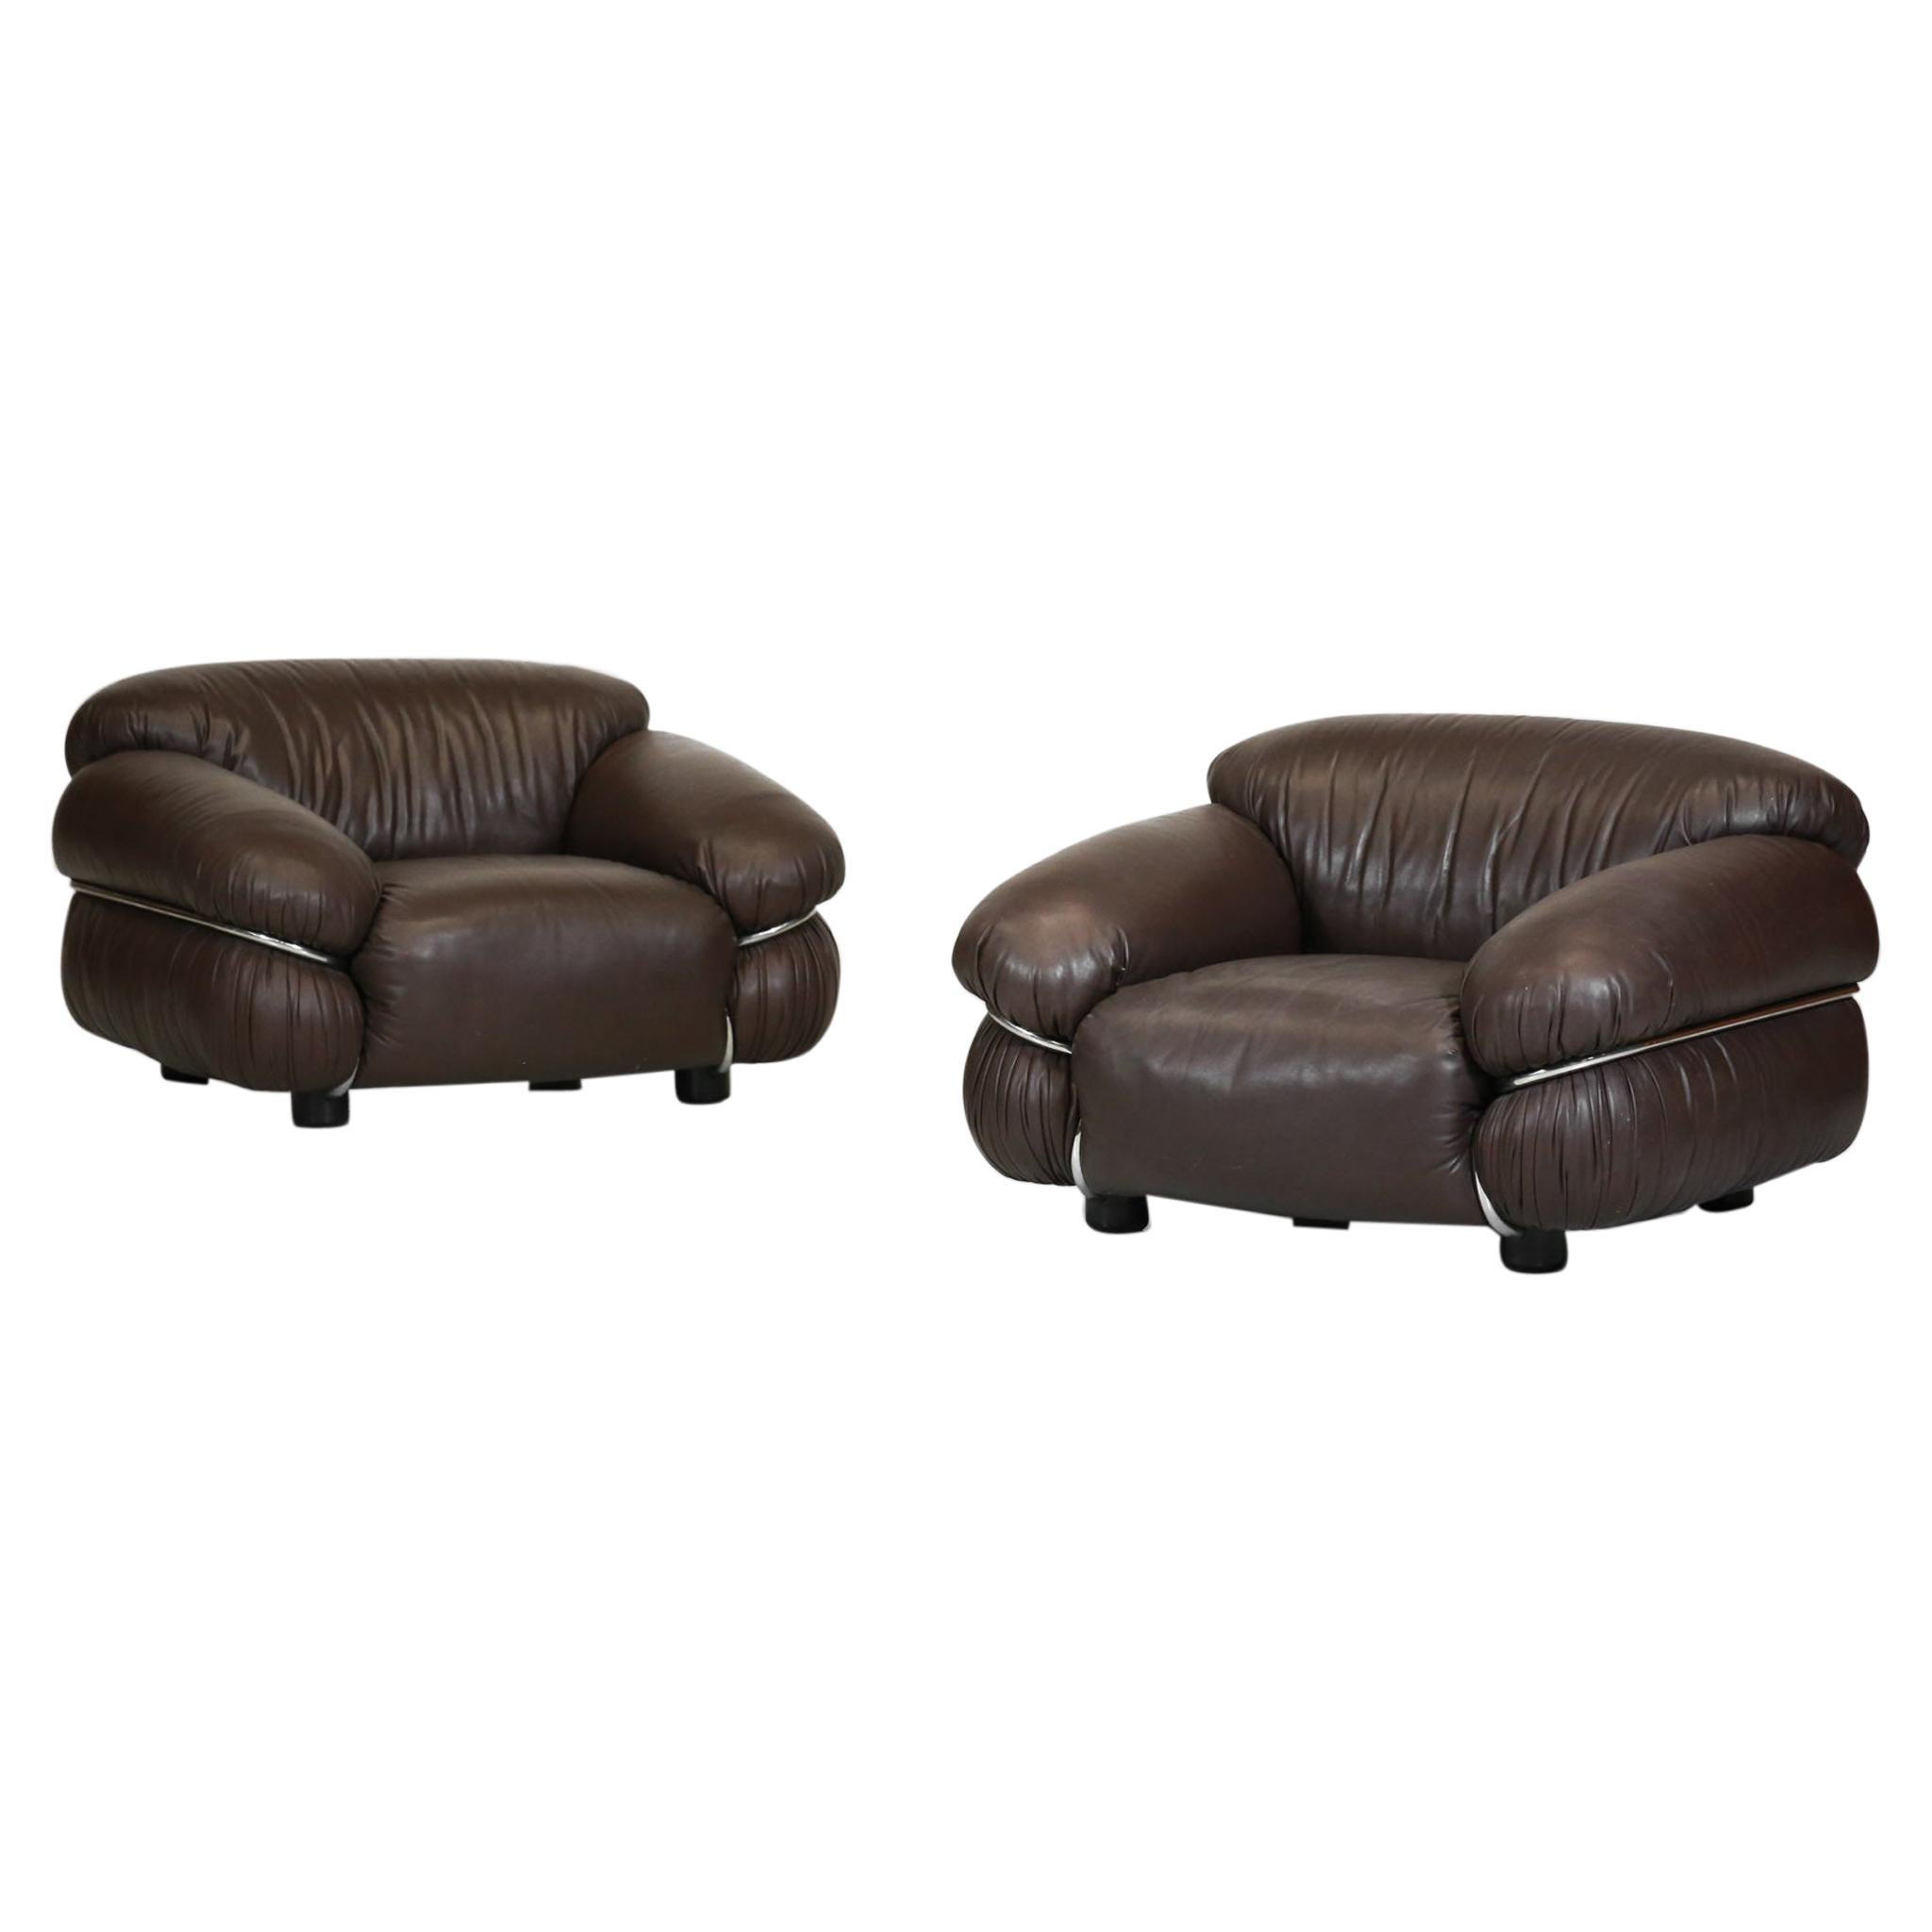 Pair of Sesann Armchairs by Gianfranco Fratinni in Leather for Cassina Italian